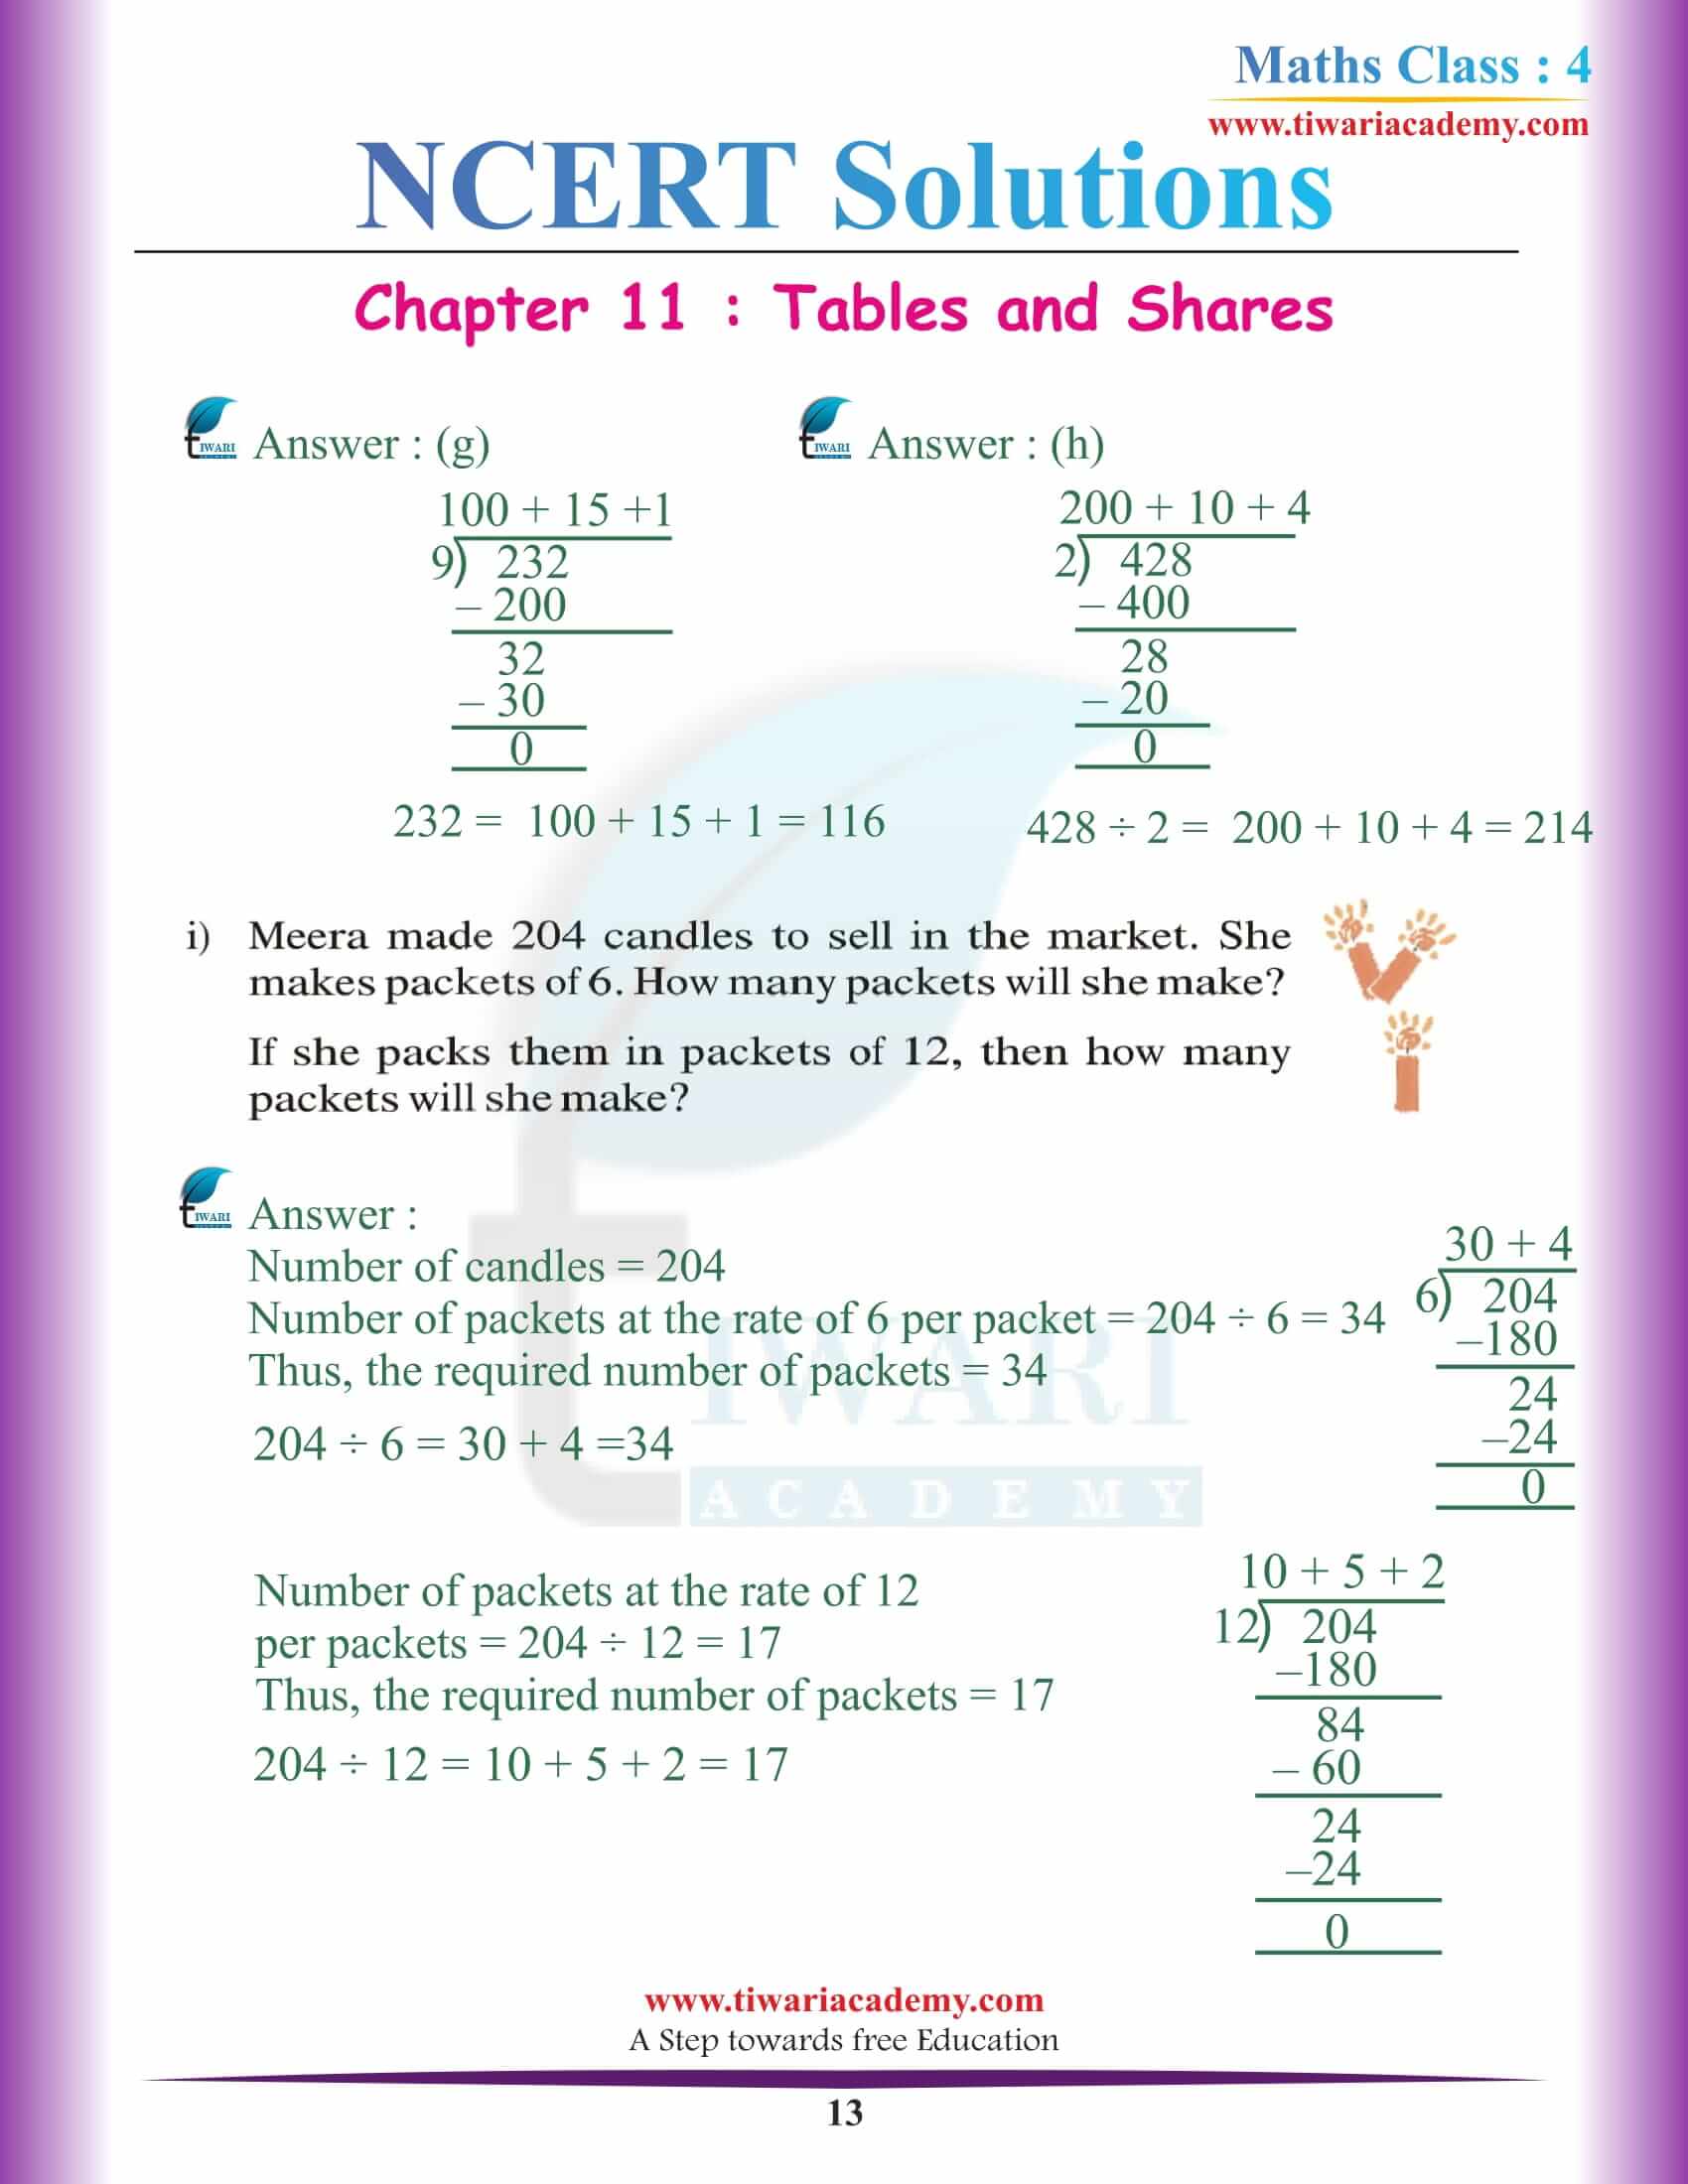 Class 4 Maths NCERT Chapter 11 Solutions for up board